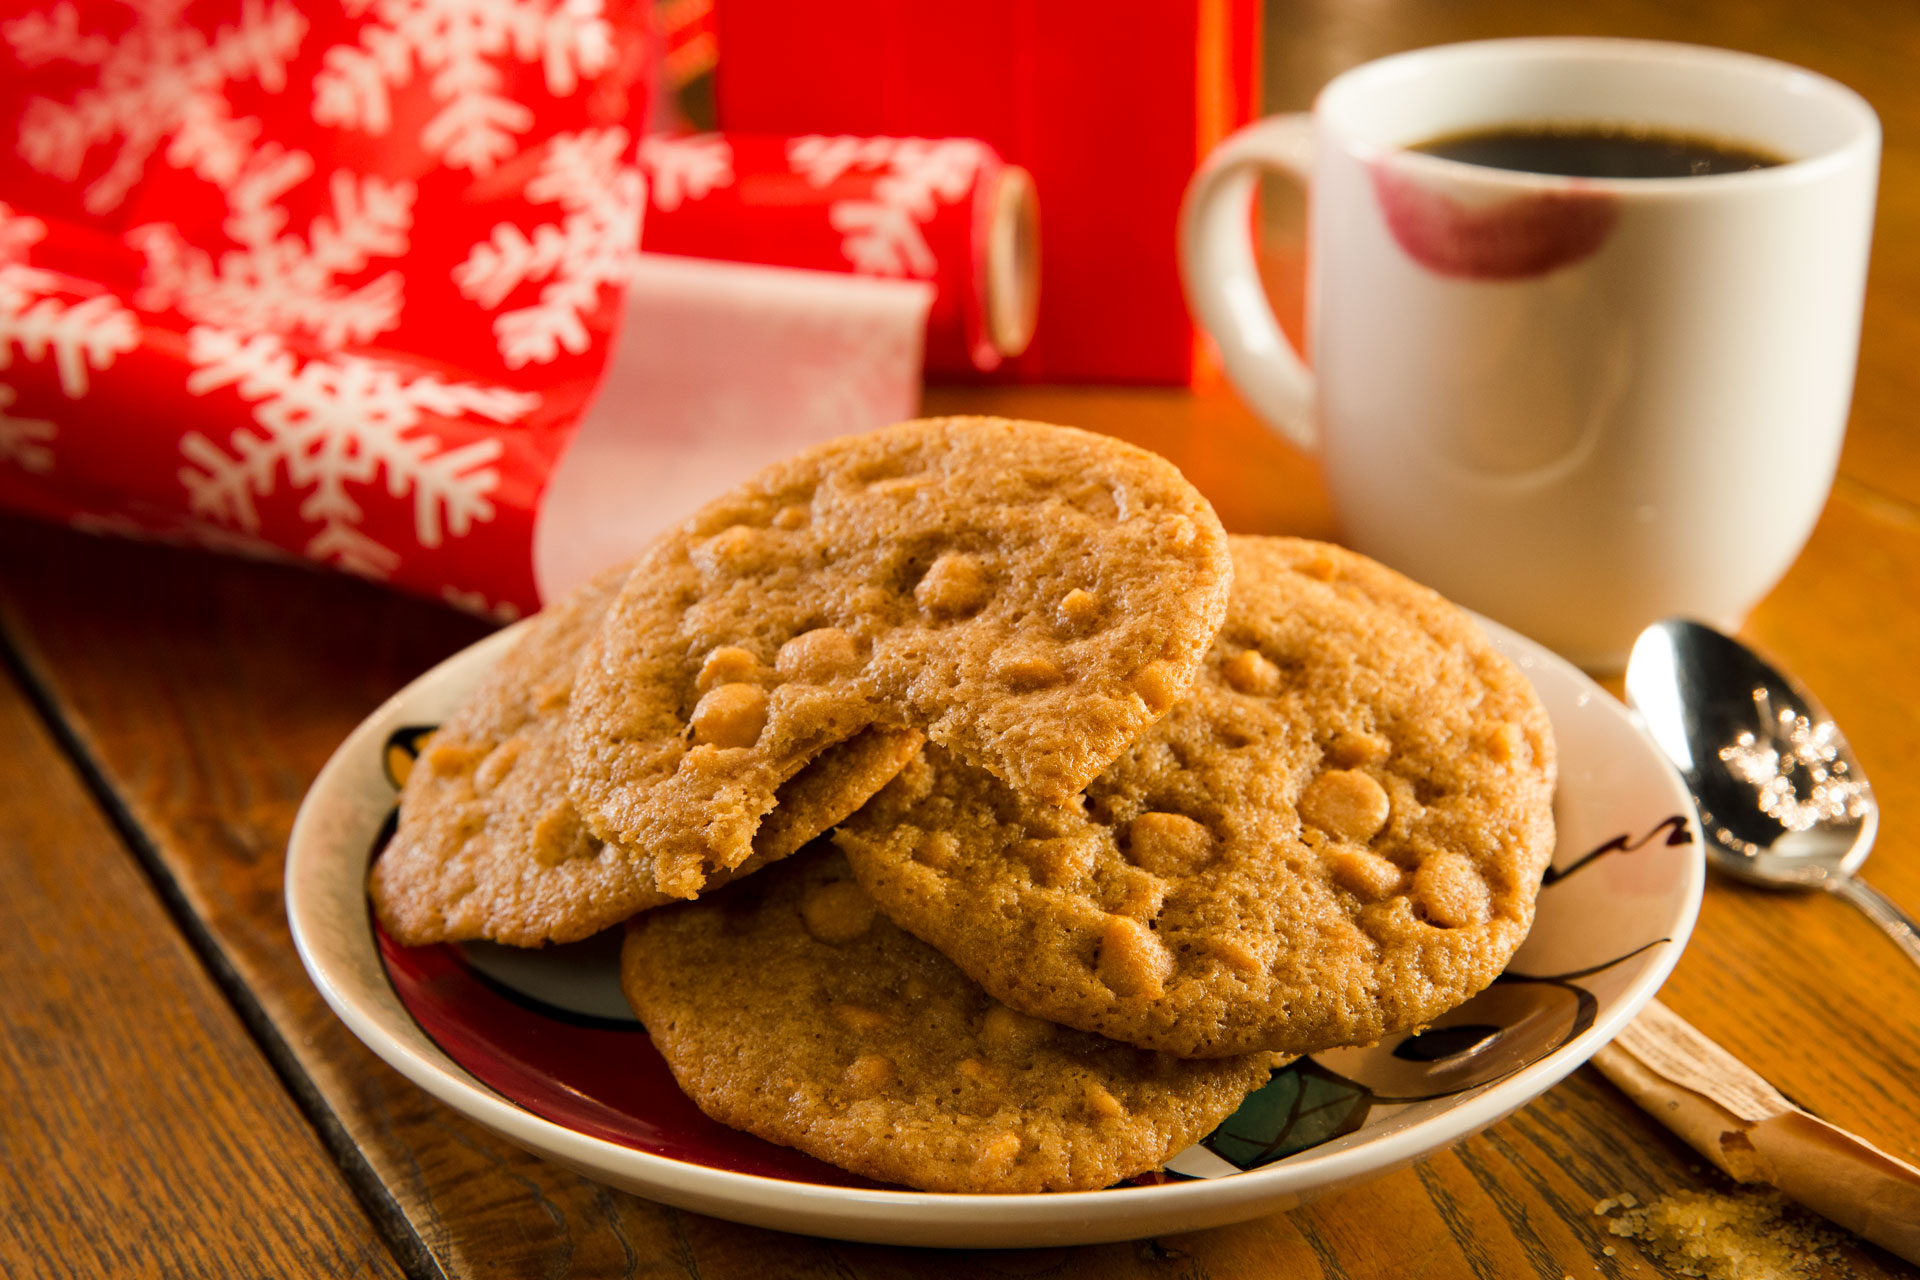 If you have caught onto the cold brew coffee craze, you’ll enjoy these inviting cookies made with cold brew concentrate. Don't forget the butterscotch!